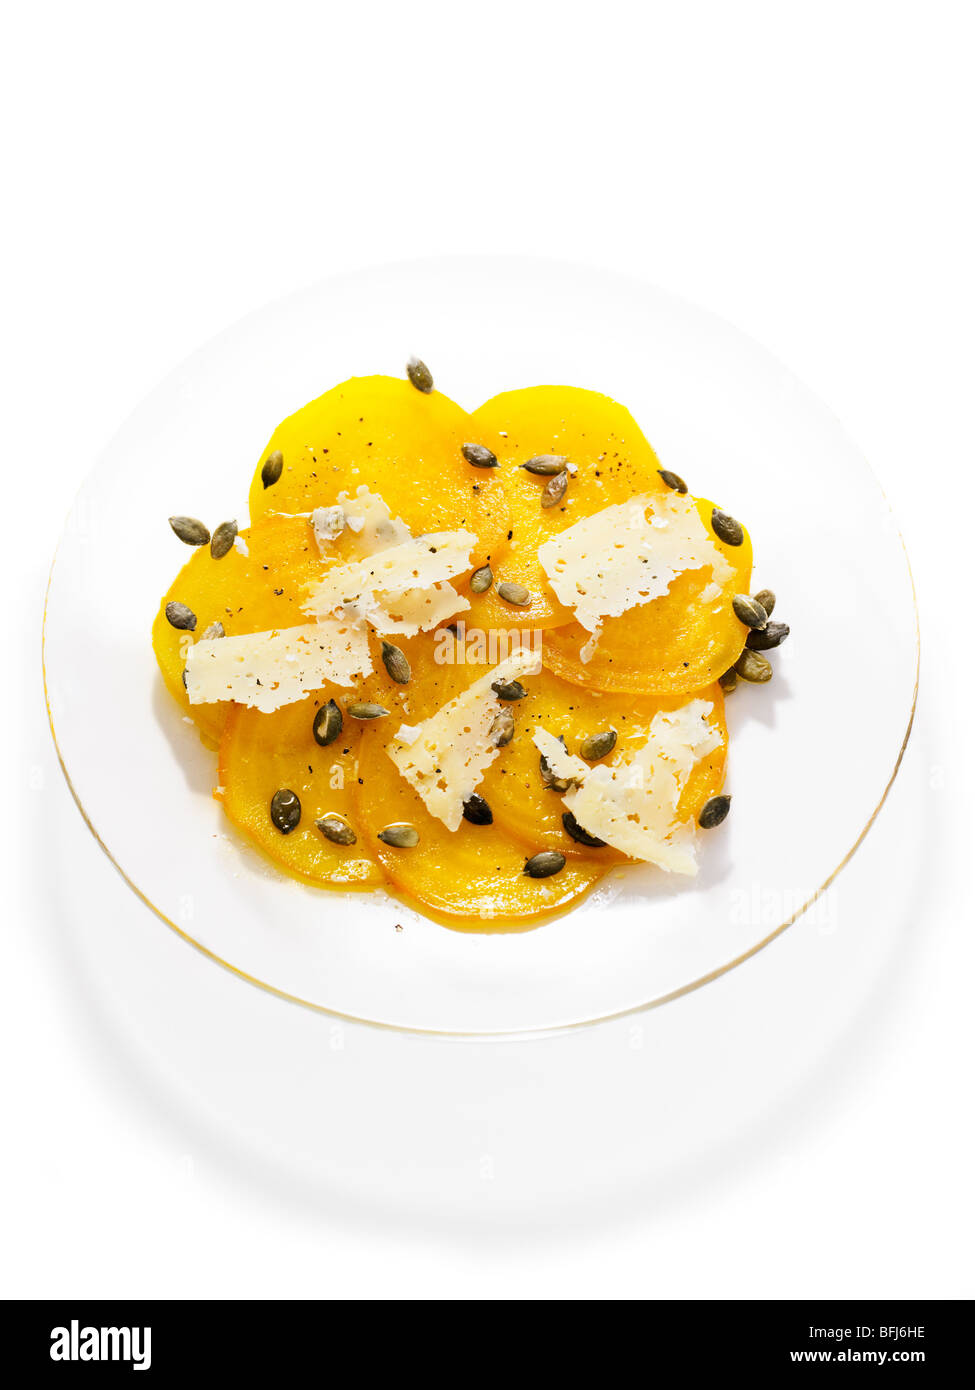 Yellow beet with seeds of pumpkin and slices of cheese, Sweden. Stock Photo